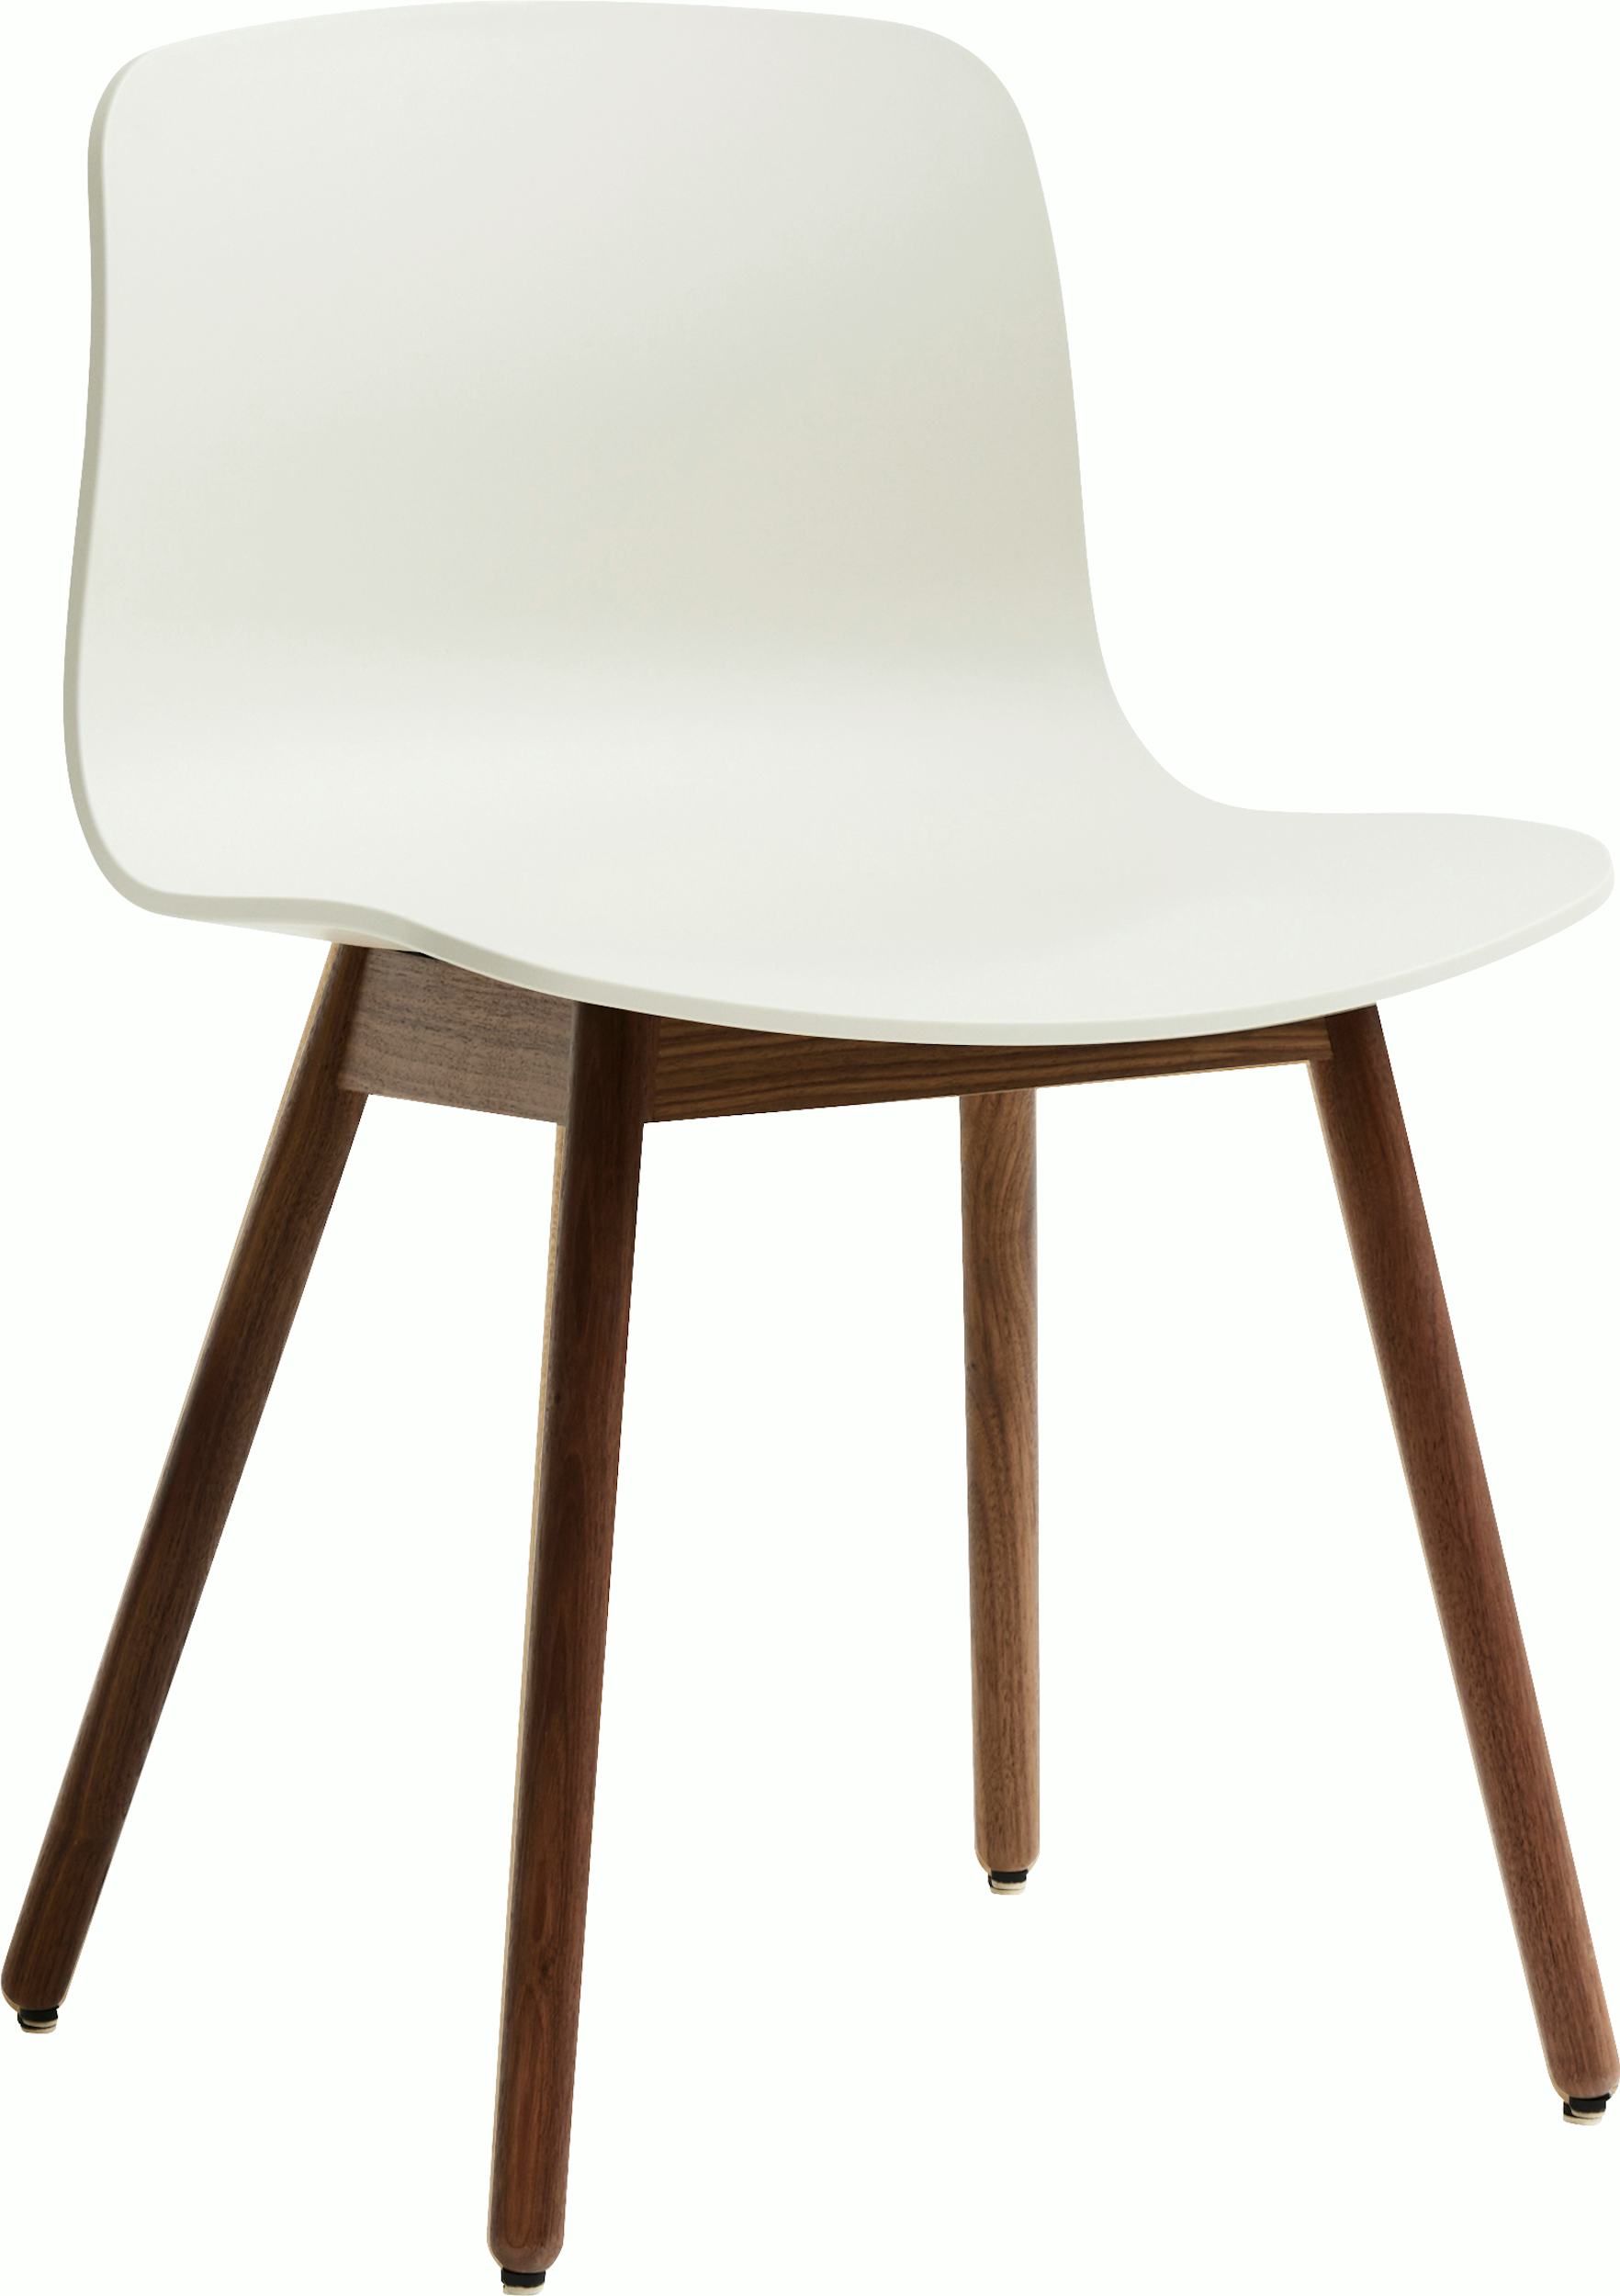 About A Chair 50 Task Chair 2.0 – HAY